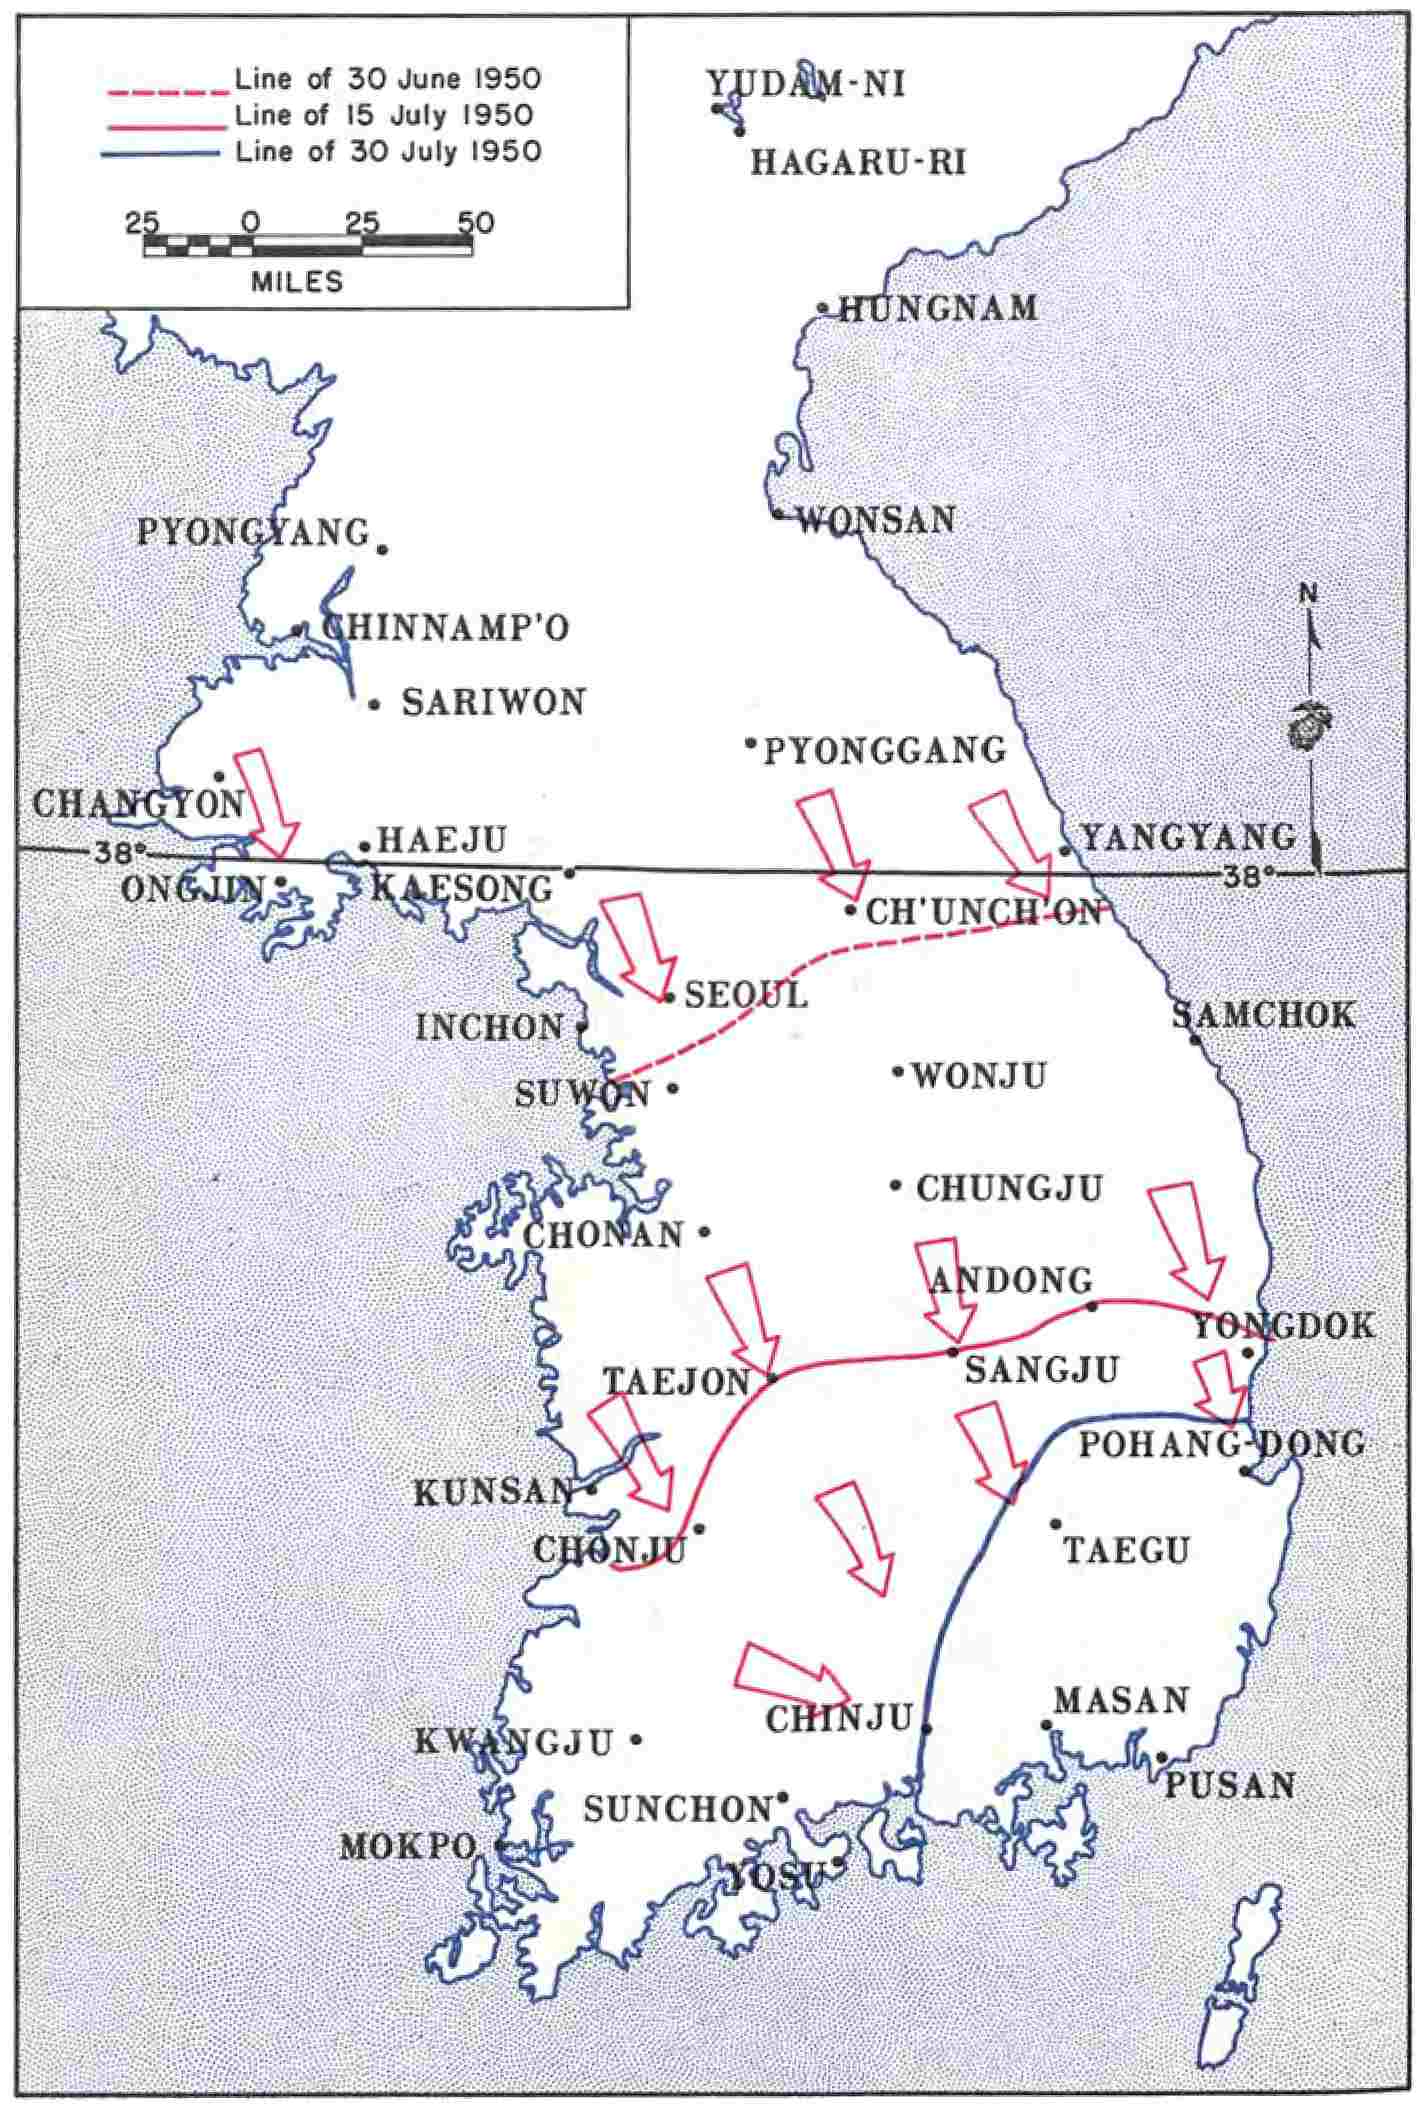 (Map of Korea, indicating battle fronts in July, 1950.)